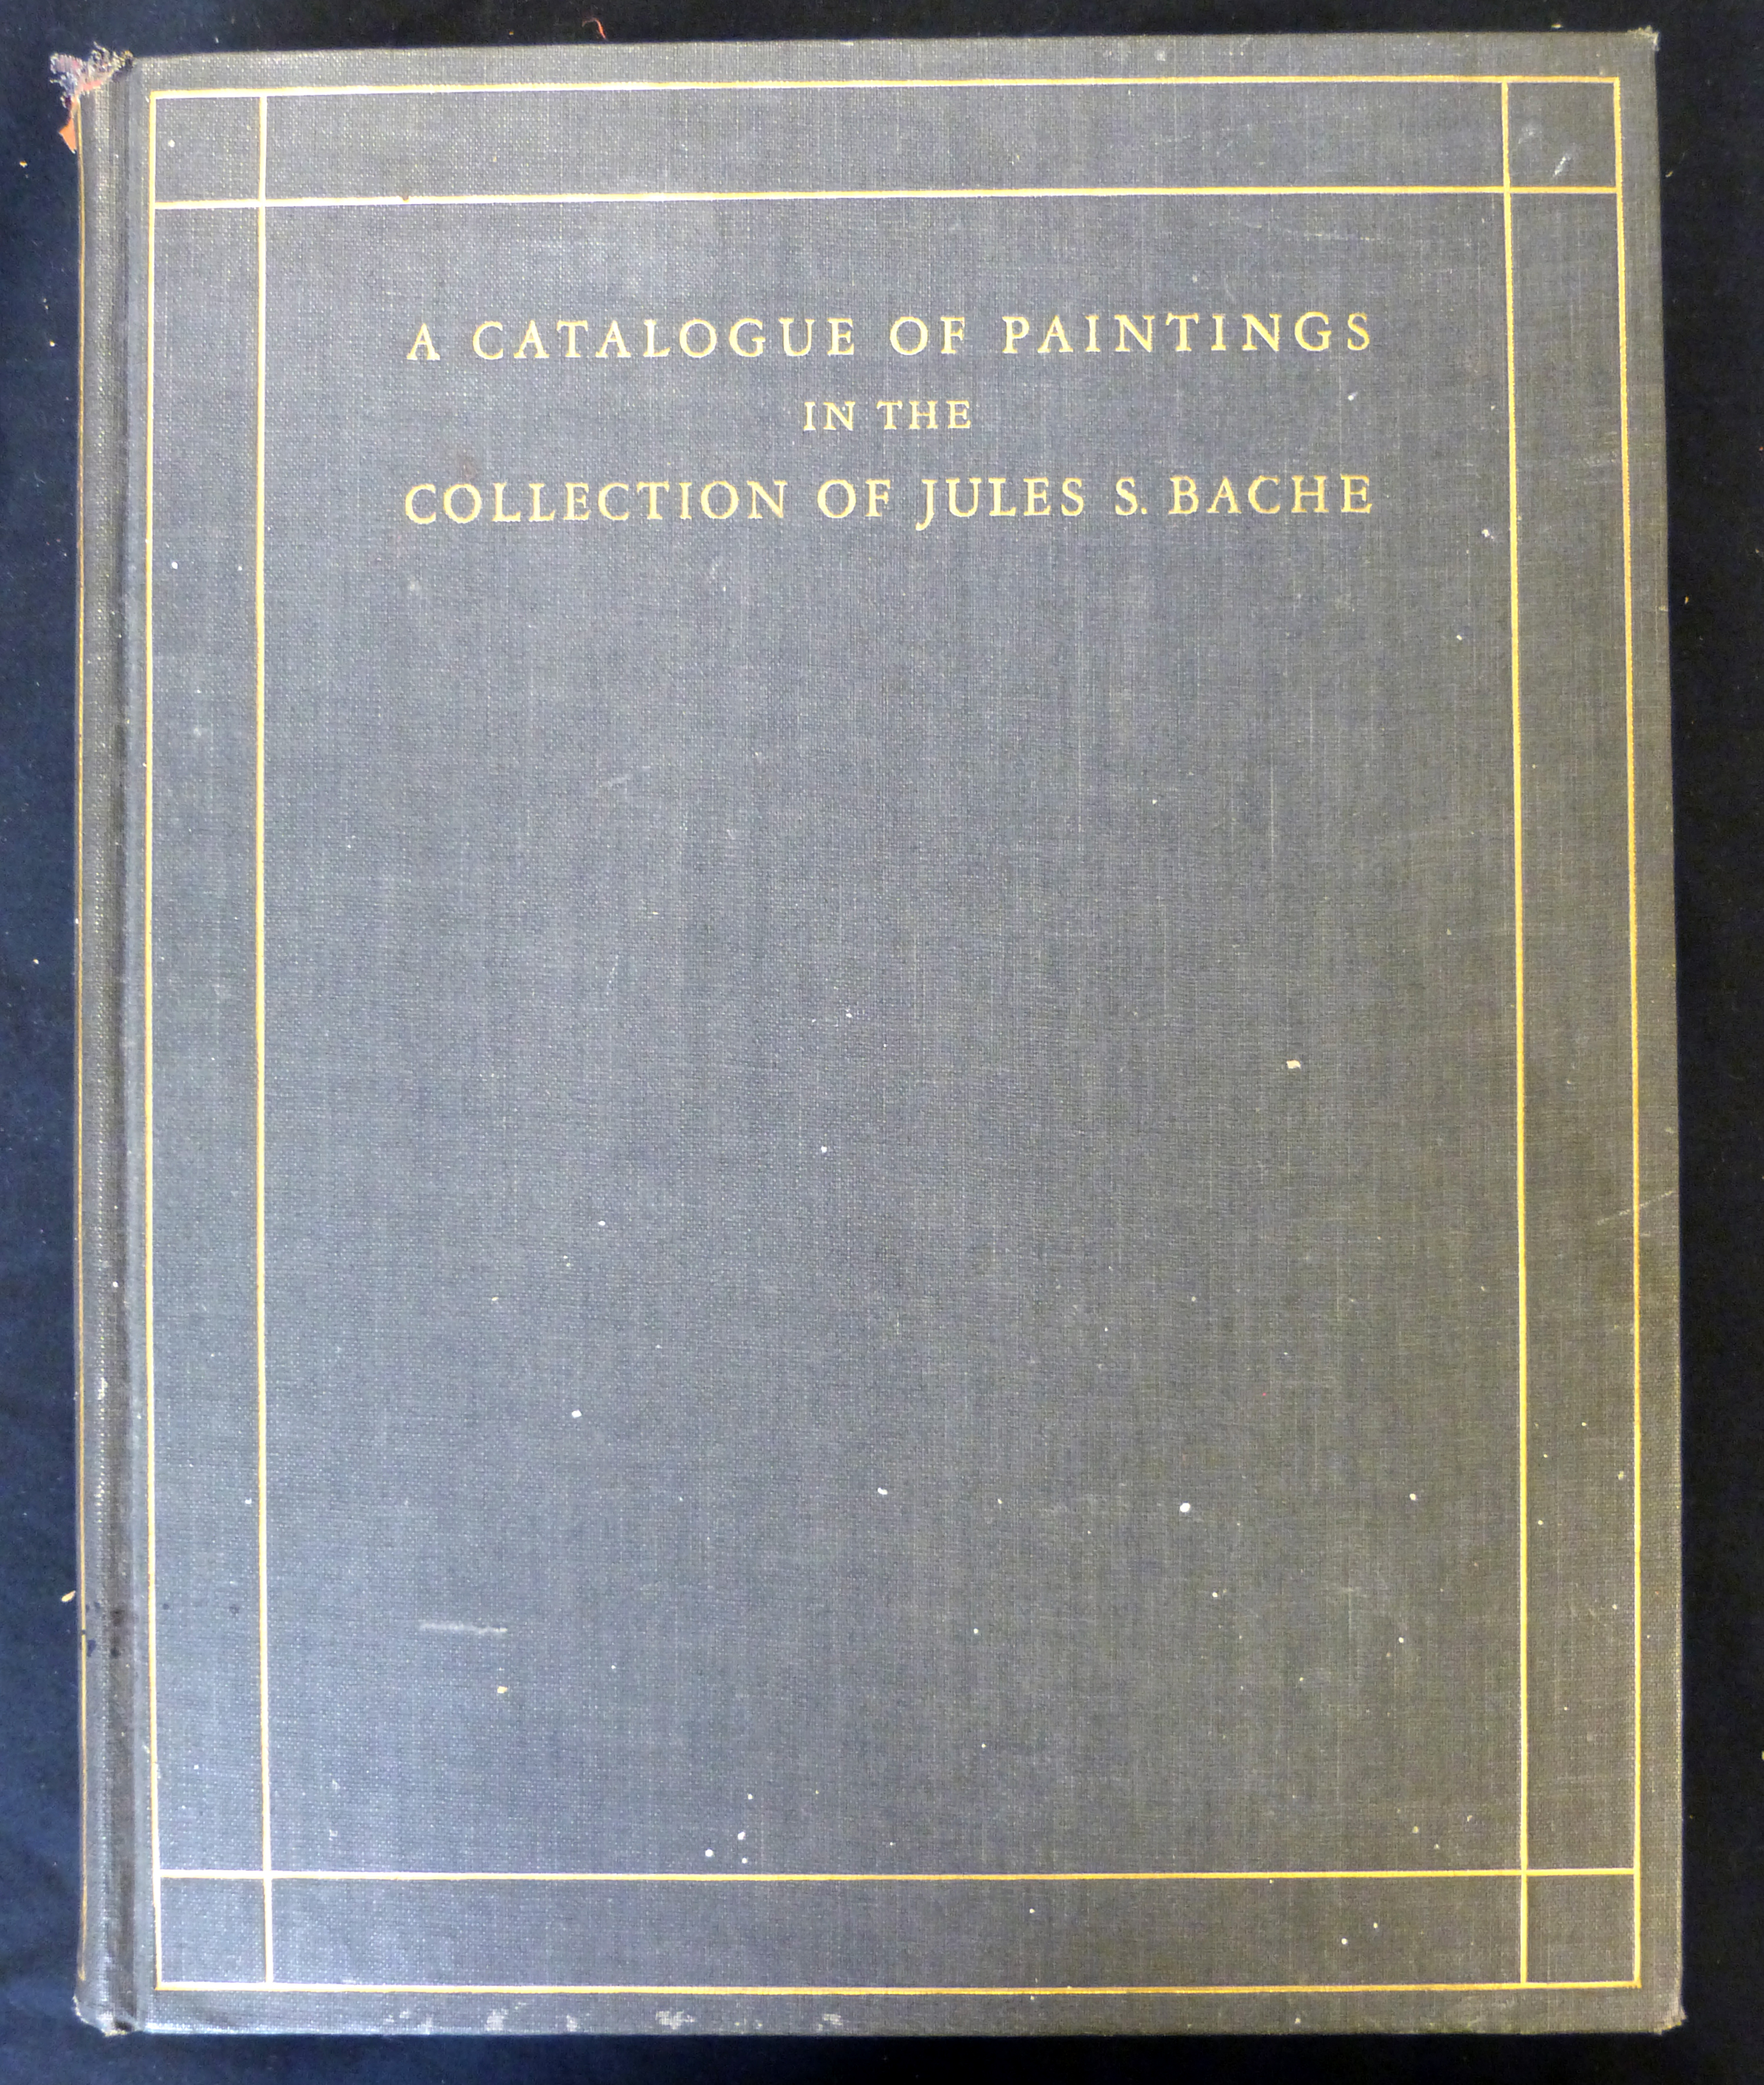 JULES SEMON BACHE: A CATALOGUE IN THE COLLECTION OF JULES S BACHE, New York, 1929, 1st edition, - Image 2 of 3